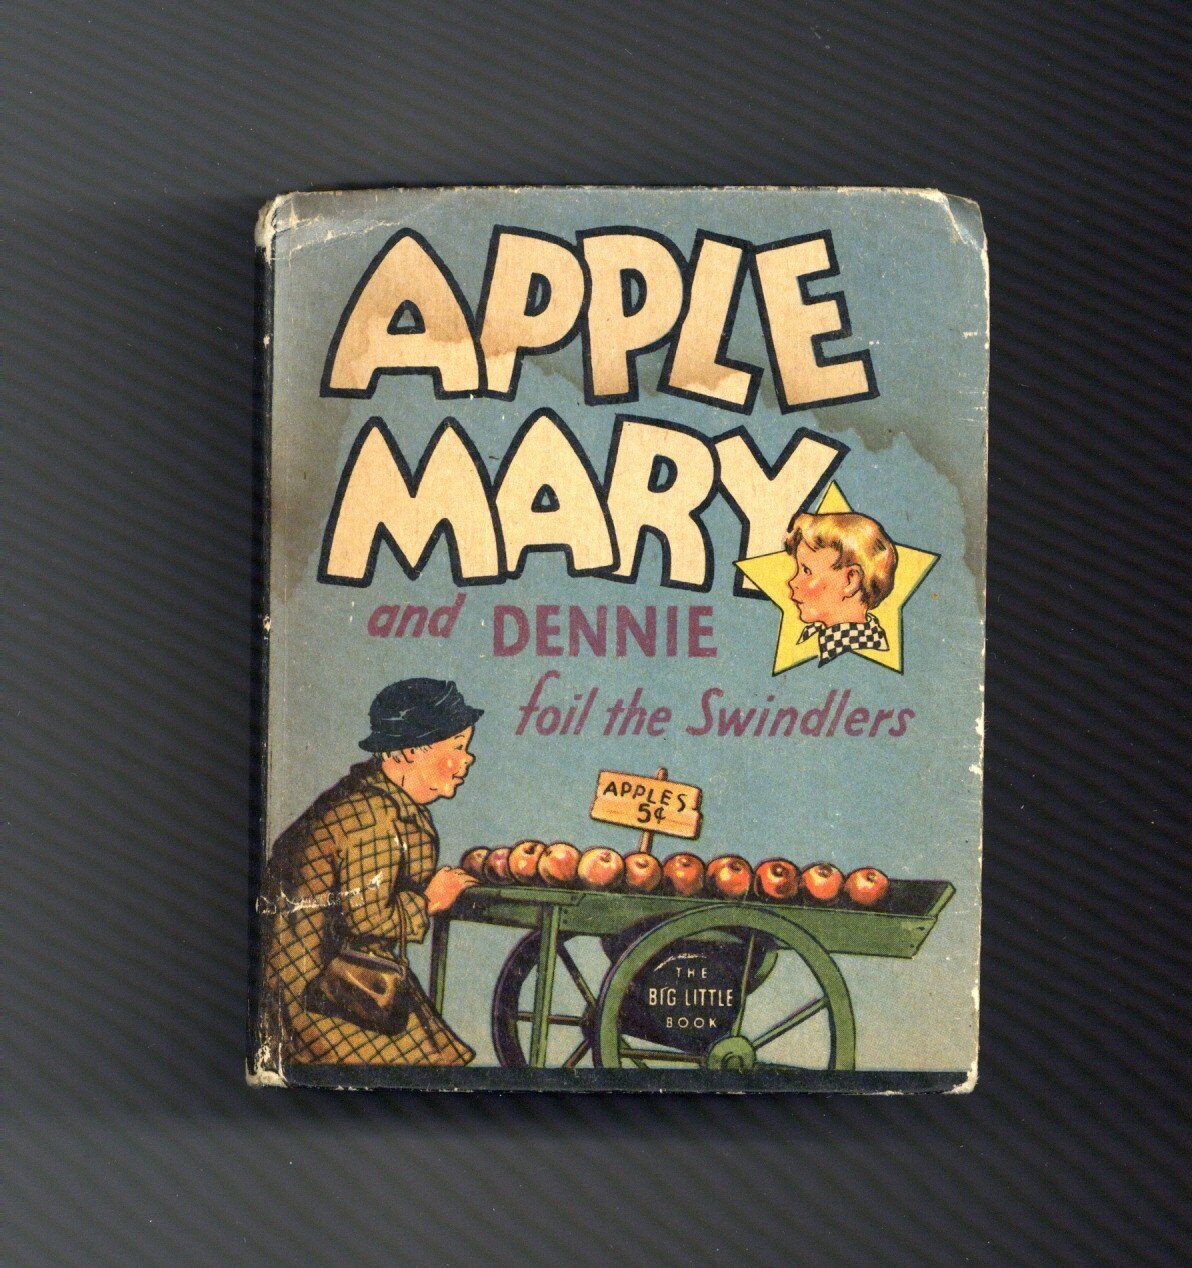 Apple Mary and Dennie Foil the Swindlers #1130 VG 1936